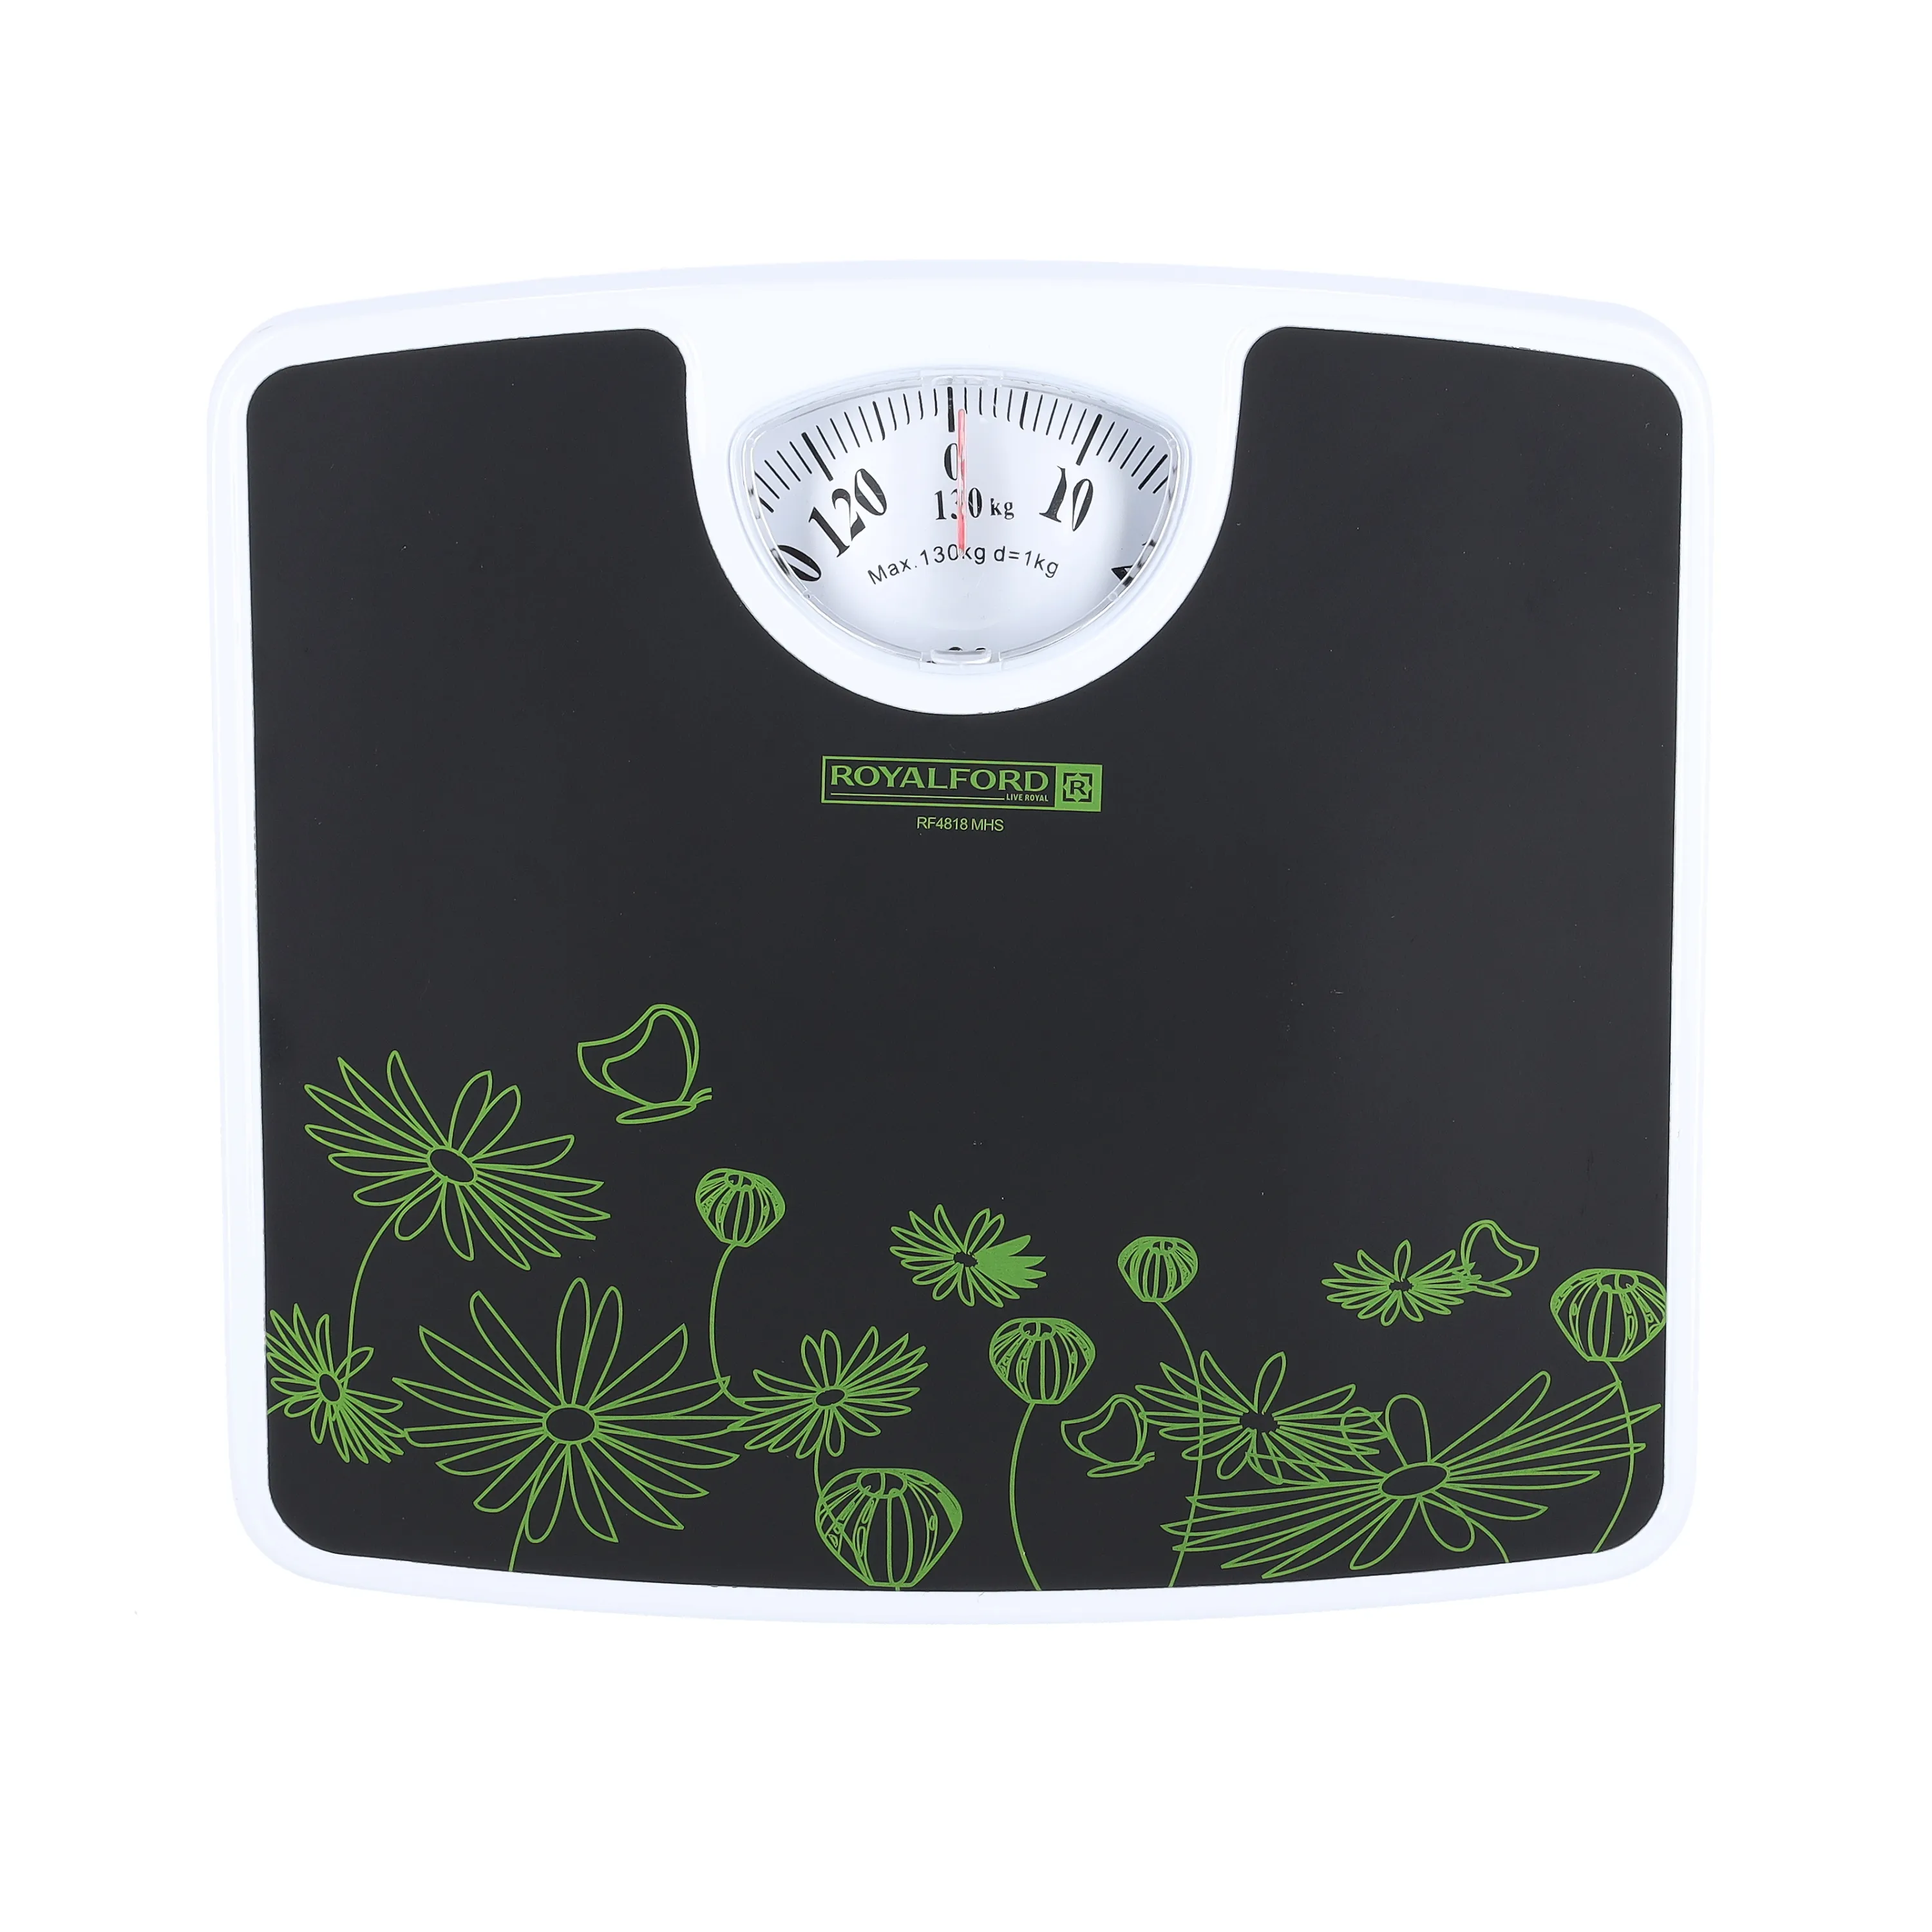 Royalford  RF4818 Weighing Scale - Analogue Manual Mechanical Weighing Machine for Human Bodyweight machine, 130Kg Capacity, Bathroom Scale, Large Rotating dial, Compact